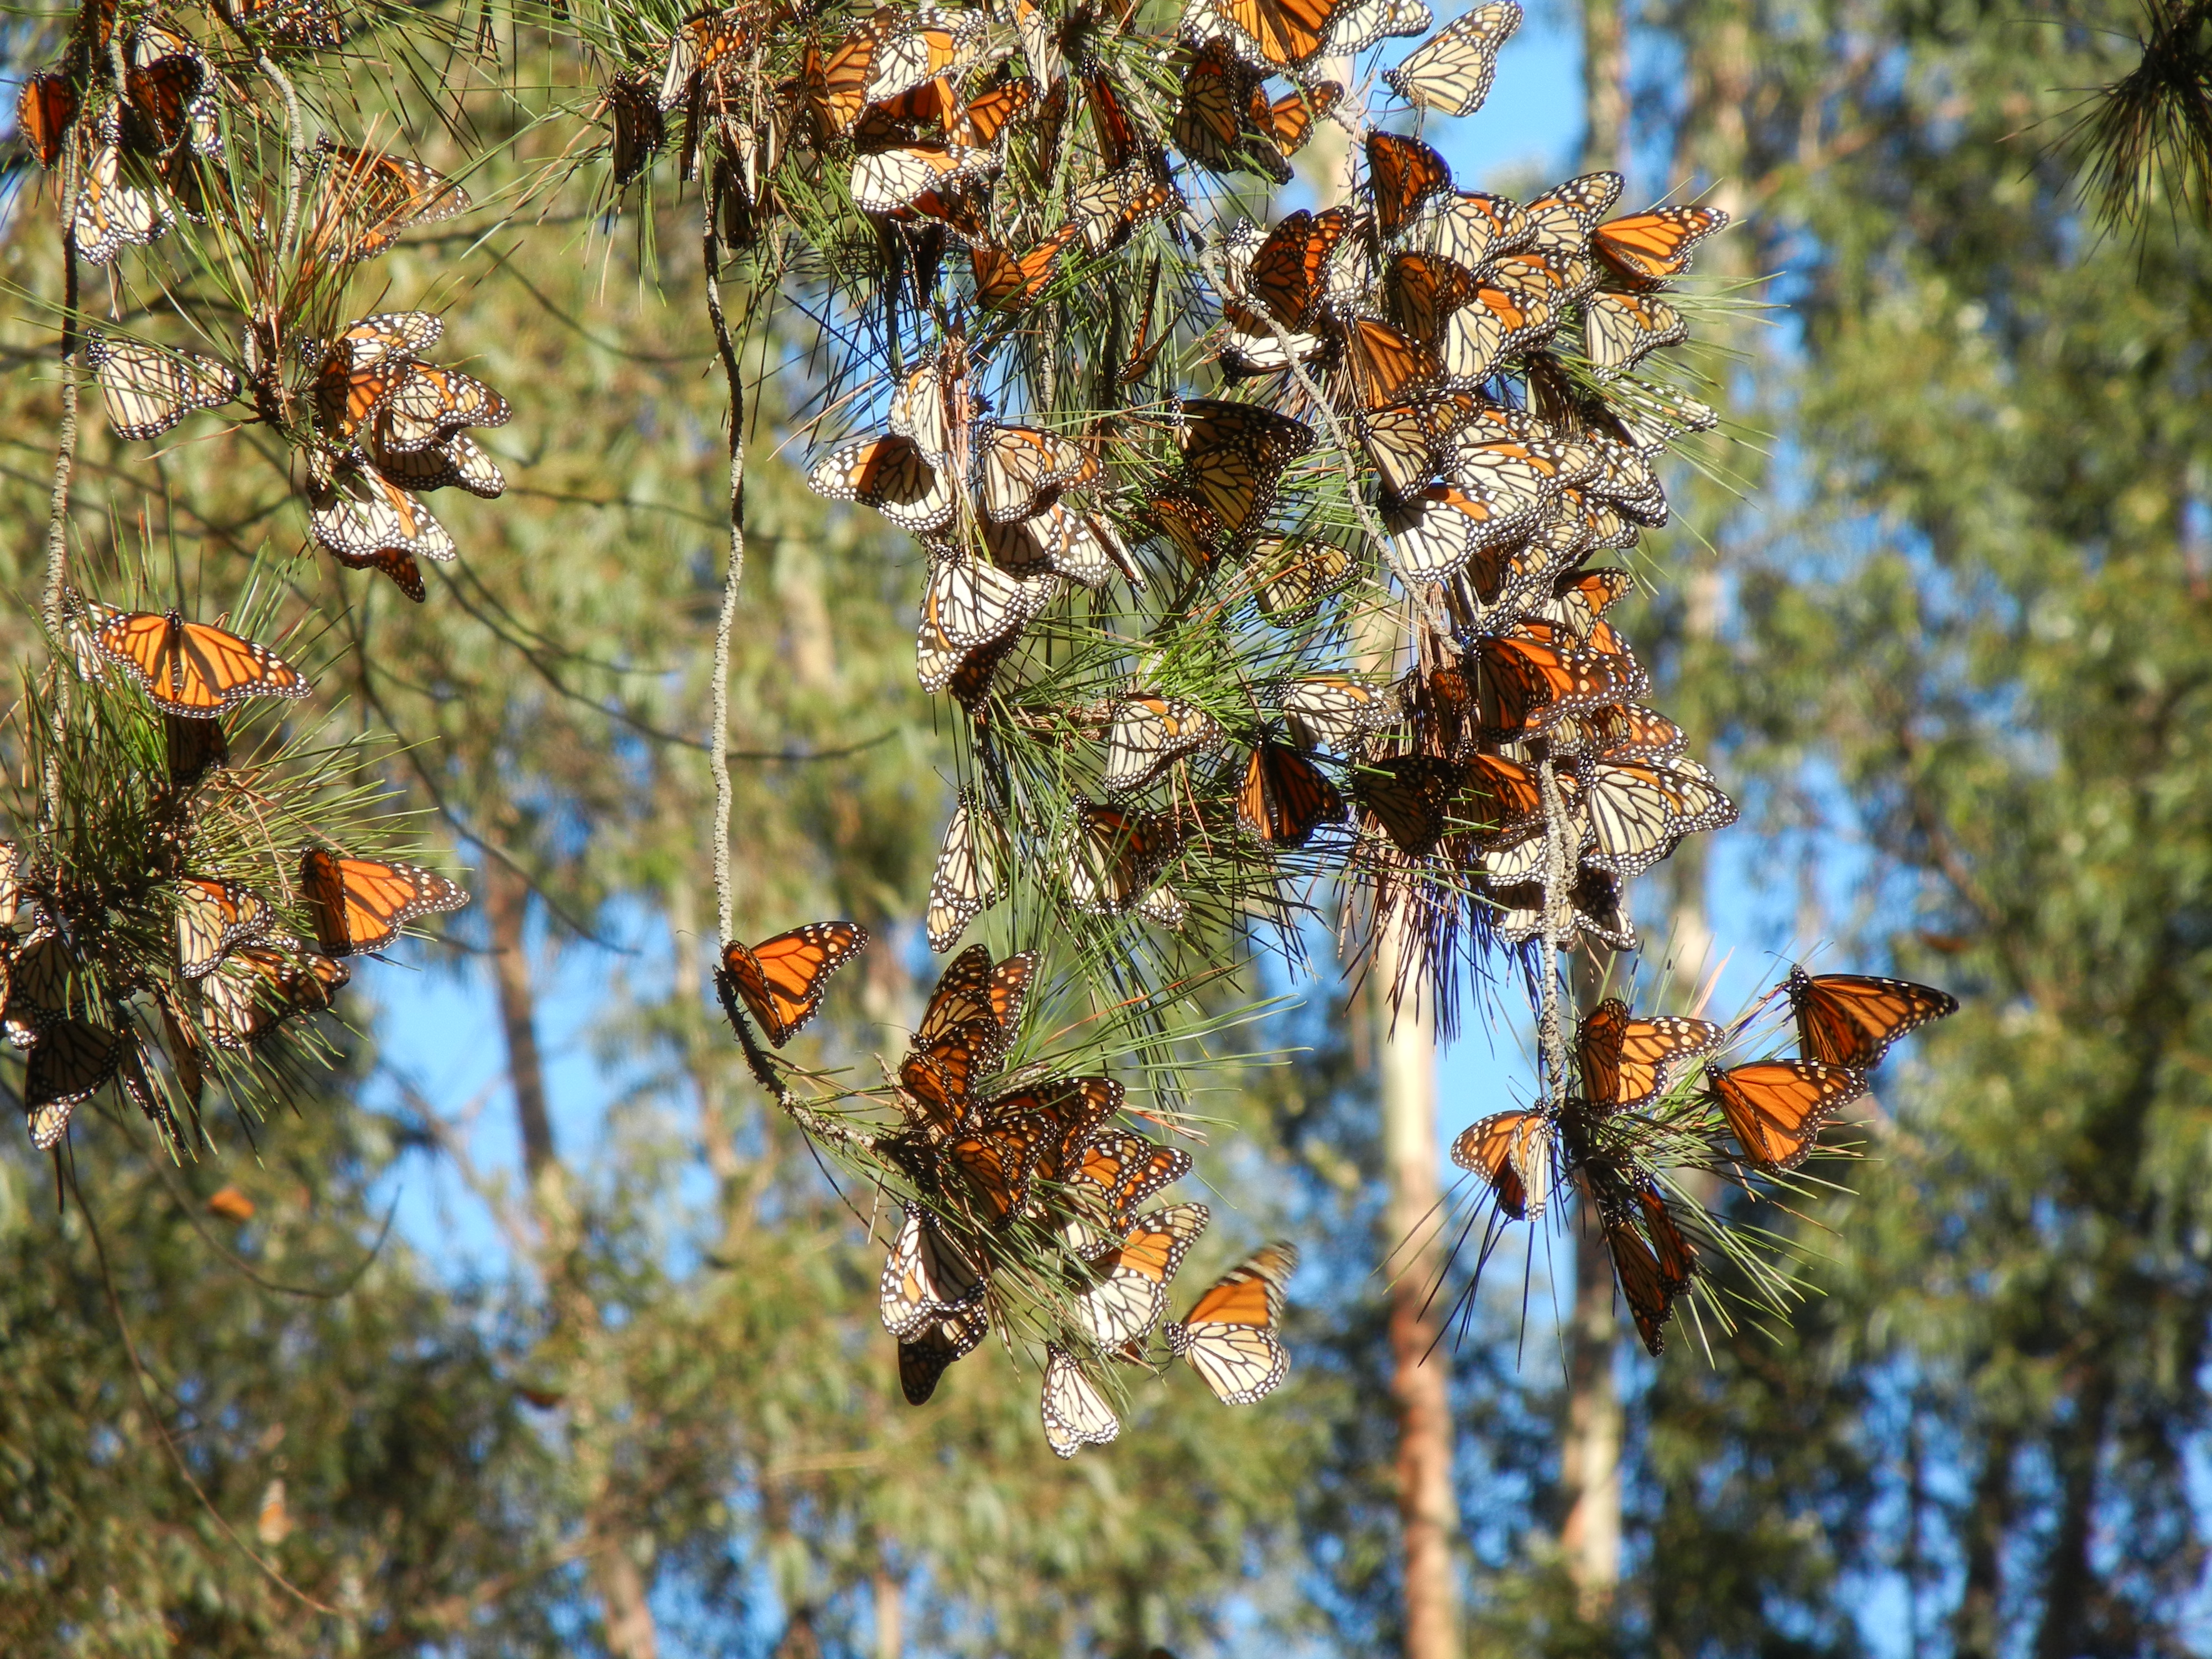 Monarch butterflies rest on trees in the sun during the winter in California.